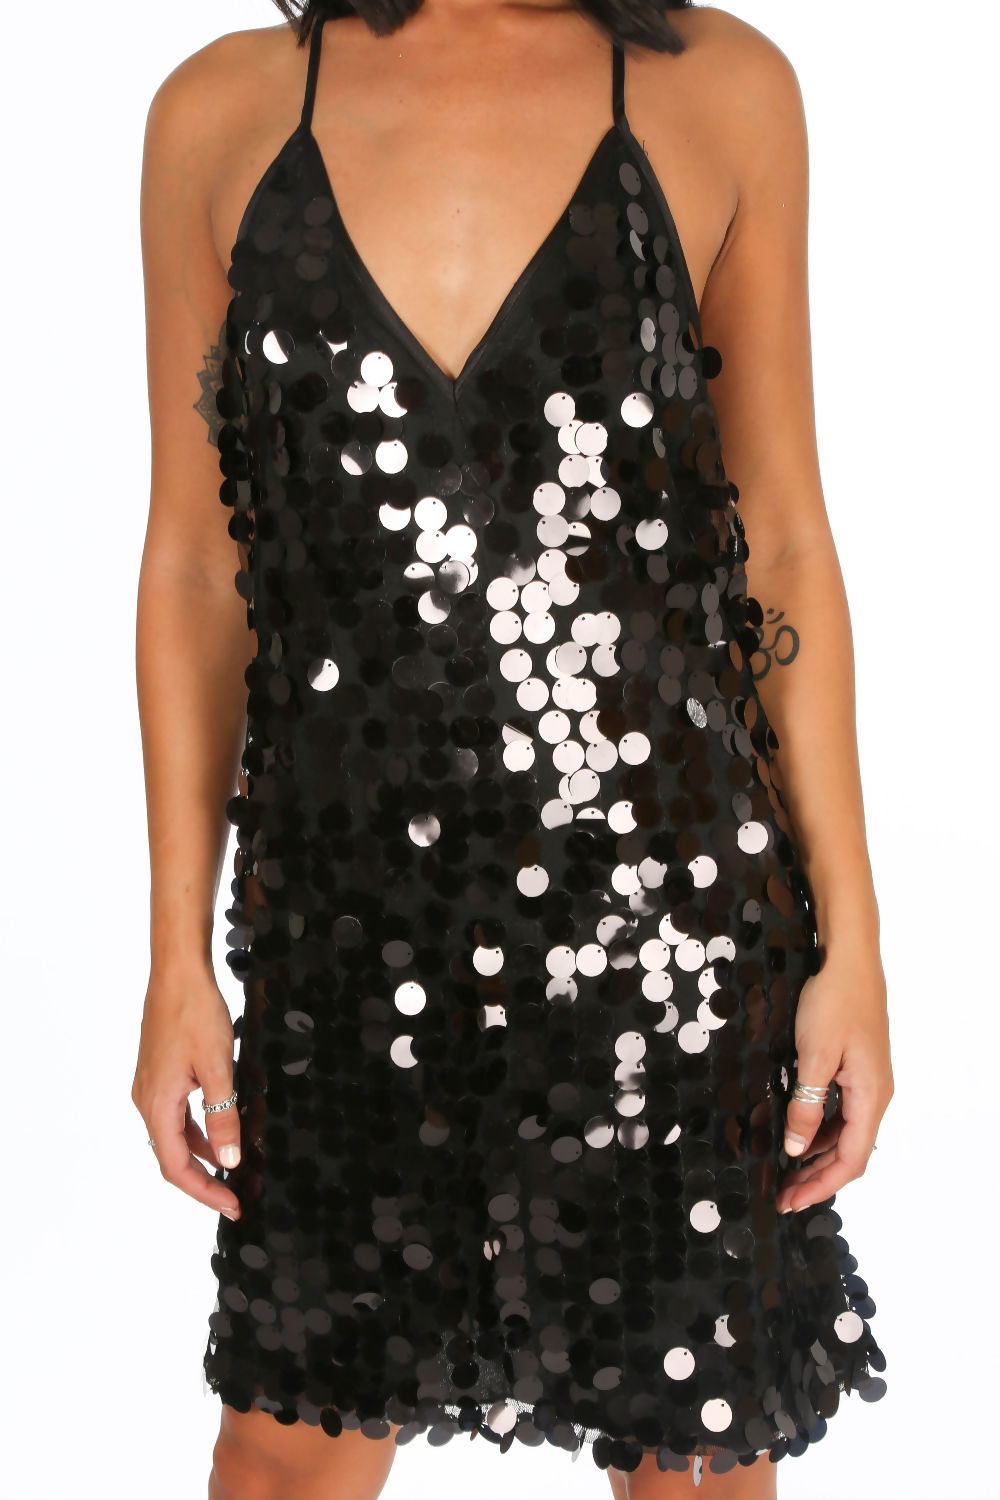 Model wears a shift dress with large sequin circled detailing. The dress has a plunging neckline and spaghetti detailing with an open back. Model stands facing the camera with her hands by her side. There is a close up of the dress with large sequin detailing evident. 